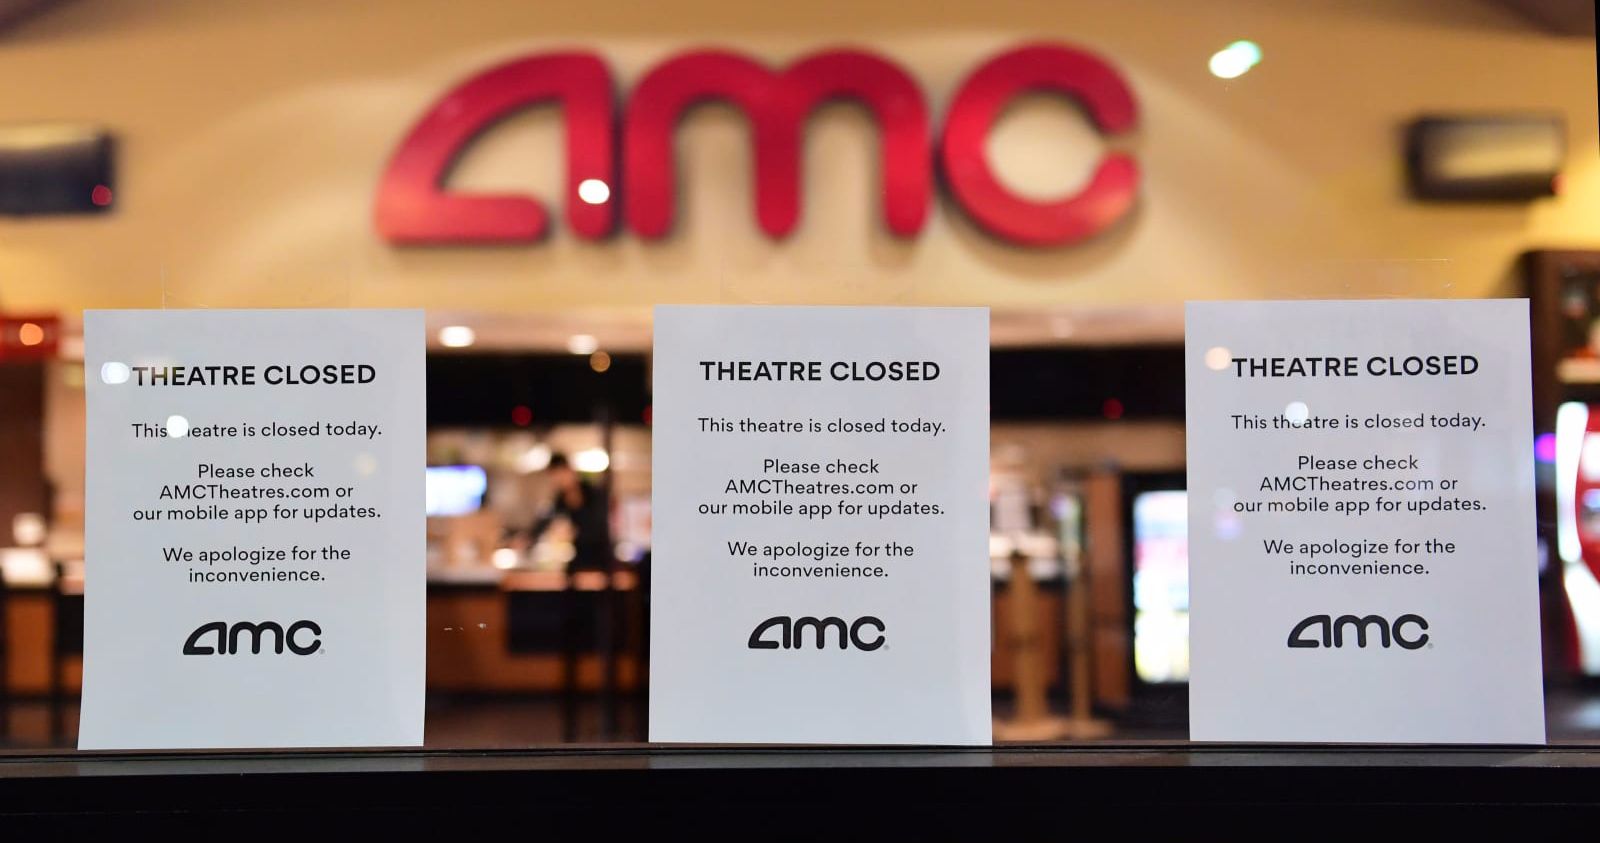 AMC Theatres Is Expected to Run Out of Money in 6 Months